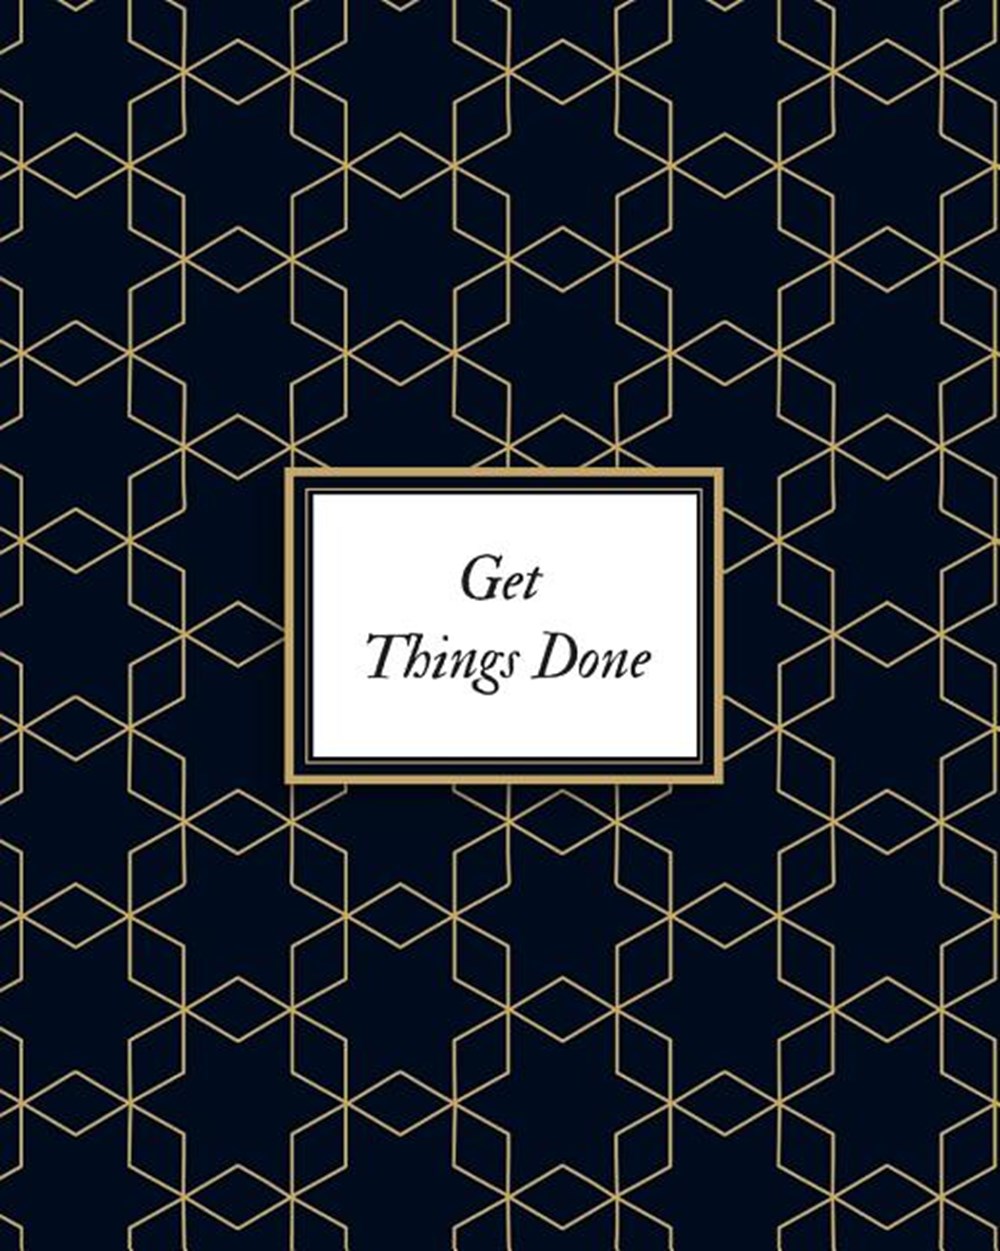 Get Things Done Daily & Weekly Productivity Planner - At-A-Glance Weekly Diary Schedule - Undated Di